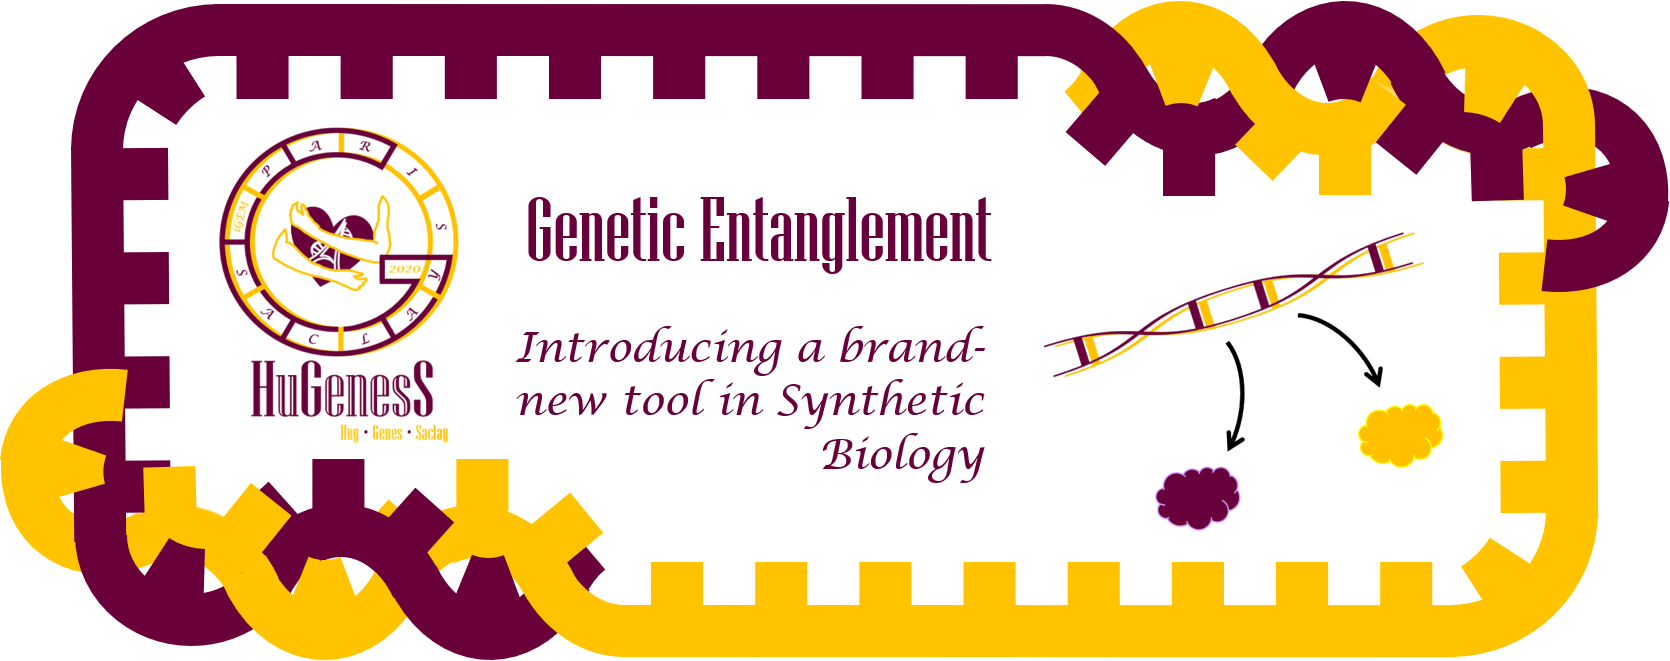 Genetic Entanglement - Introducing a brand new tool in synthetic biology